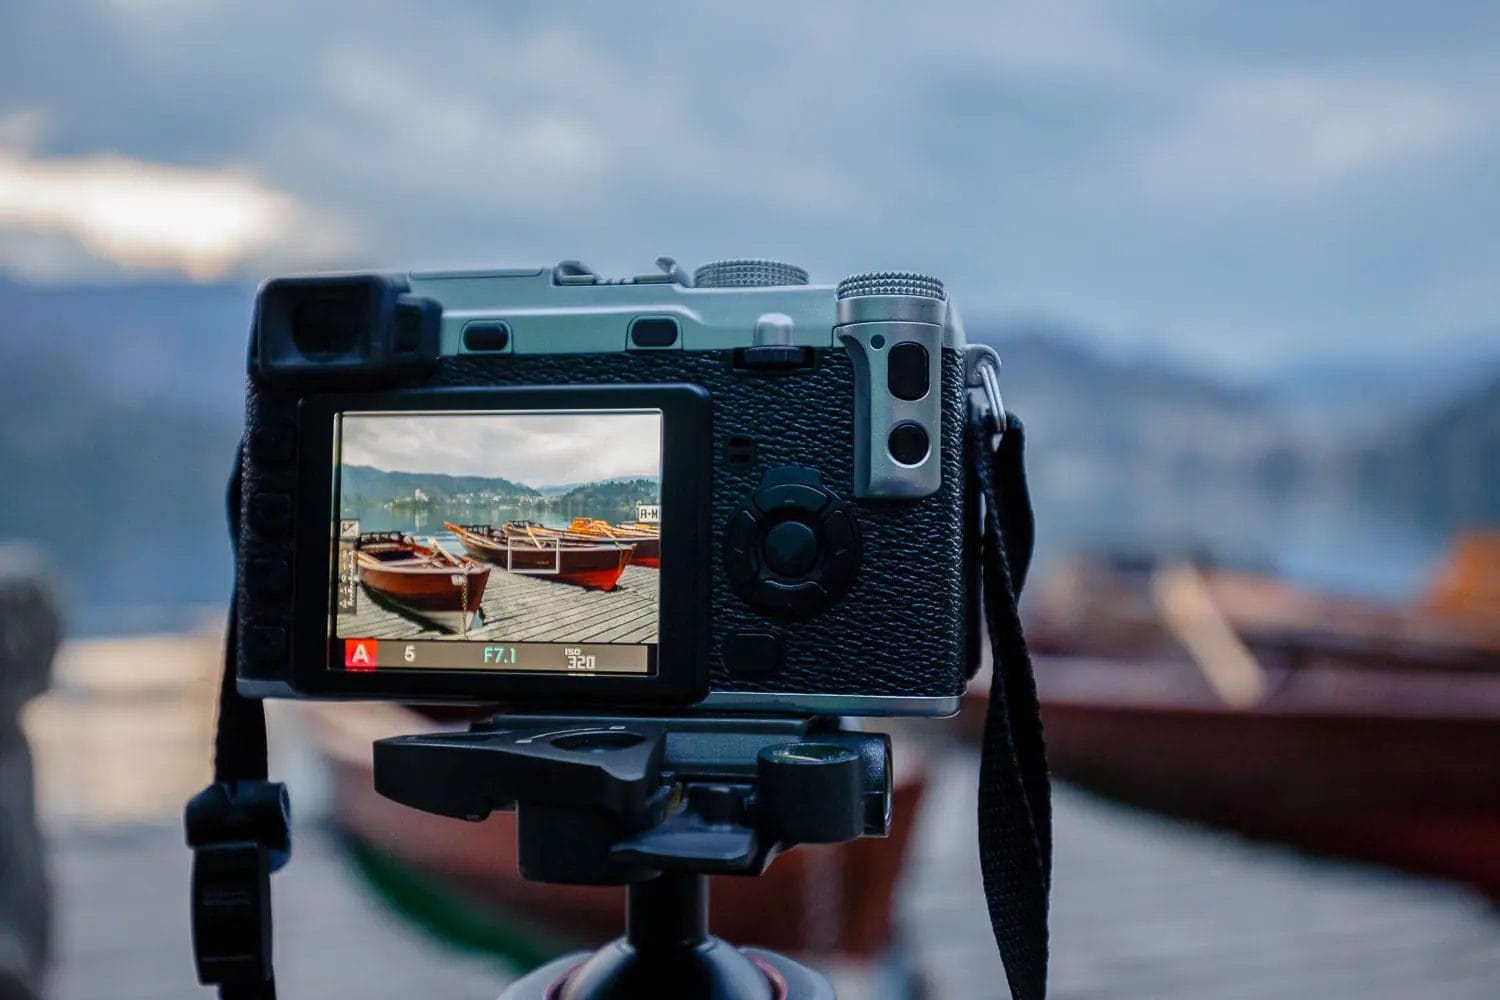 Camera on a tripod capturing a scenic view of boats on water.